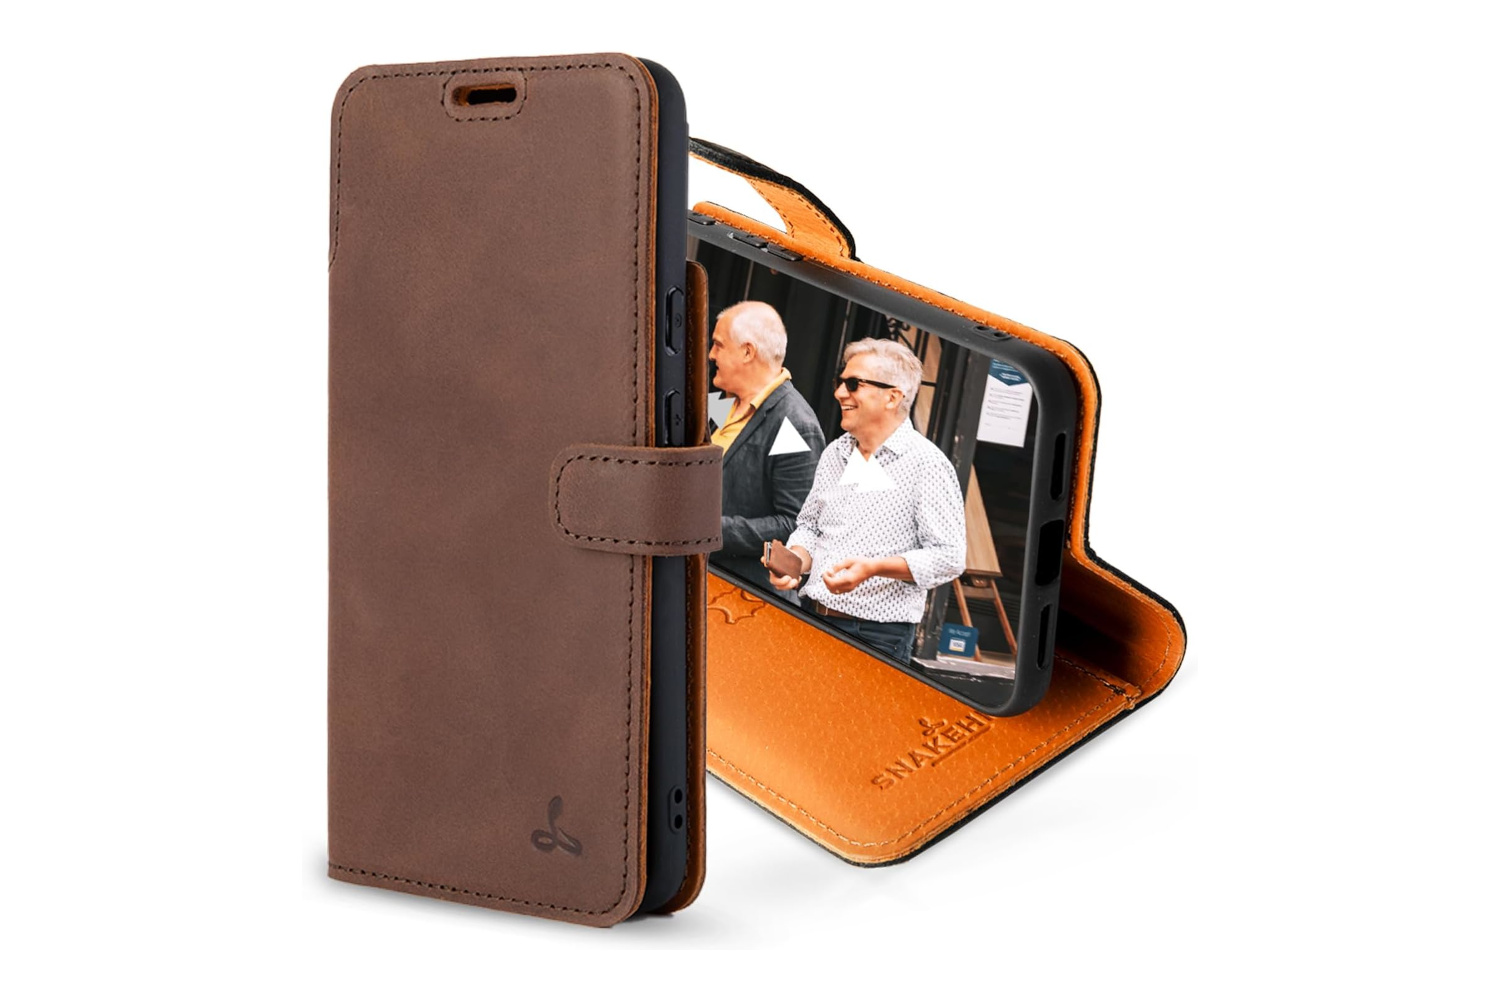 Moment Photo Case for The iPhone XR (Tan Leather)